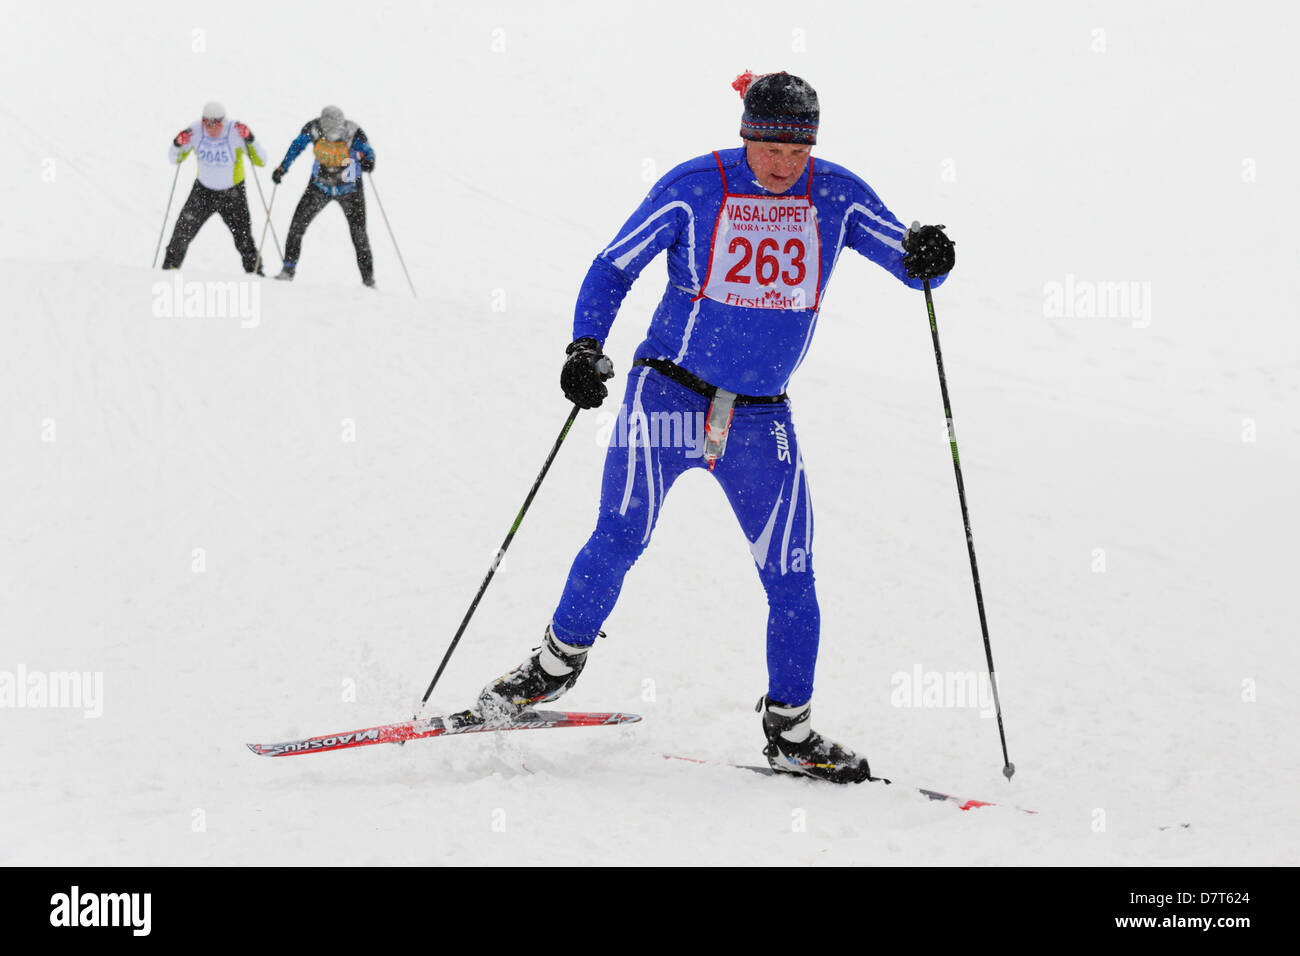 Cross country skiers near the end of the 2013 Mora Vasaloppet in a snowstorm. Stock Photo